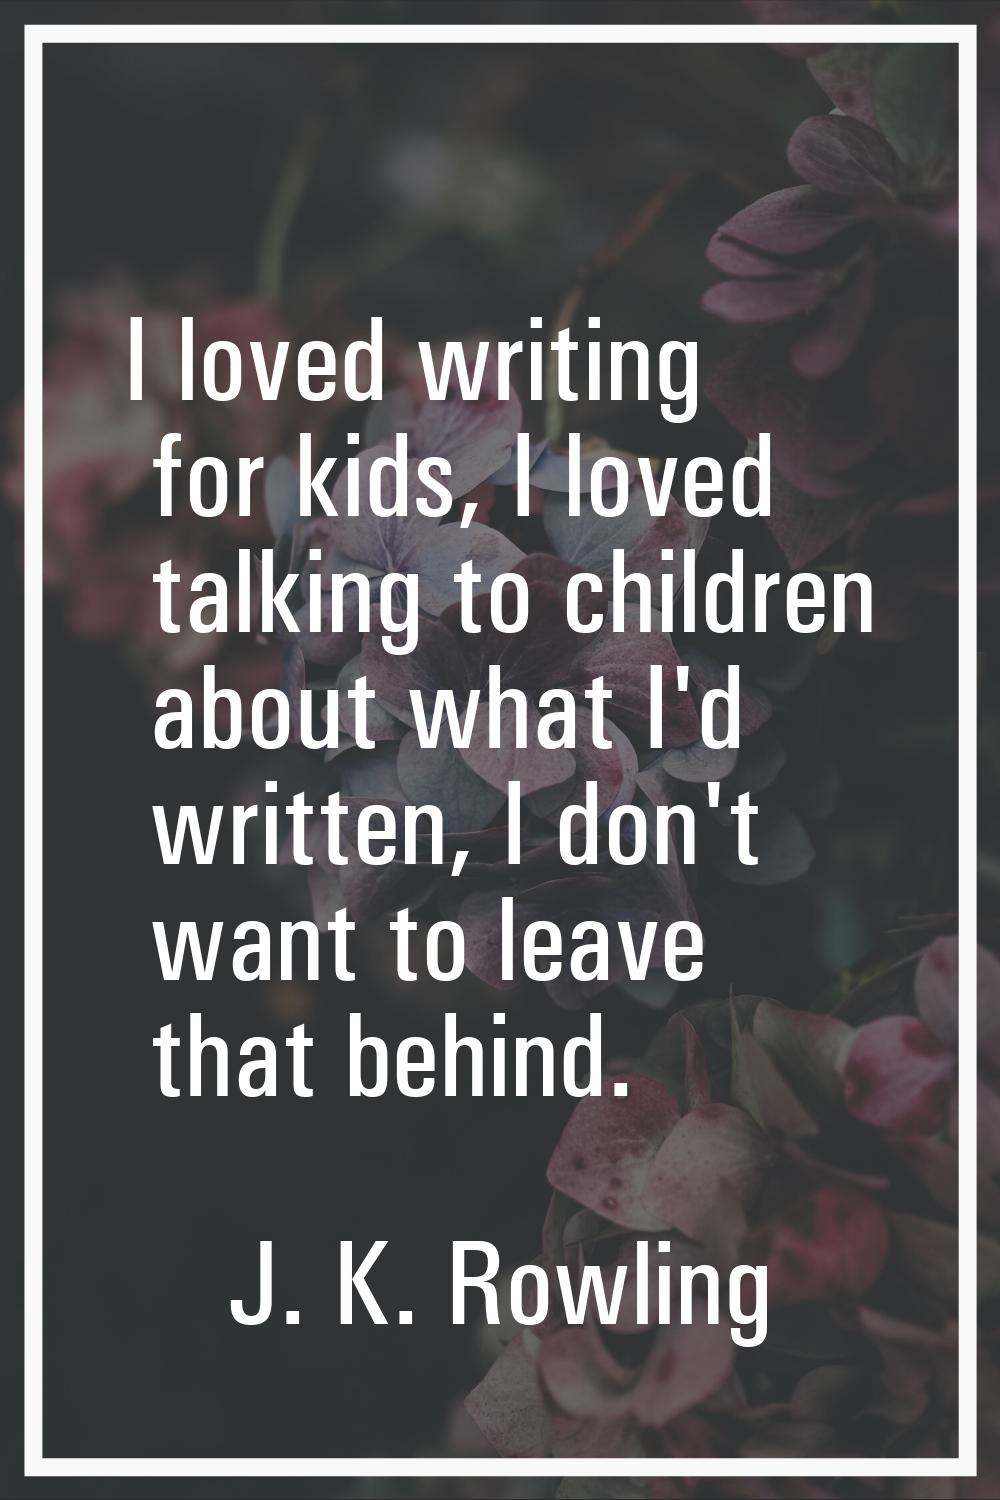 I loved writing for kids, I loved talking to children about what I'd written, I don't want to leave